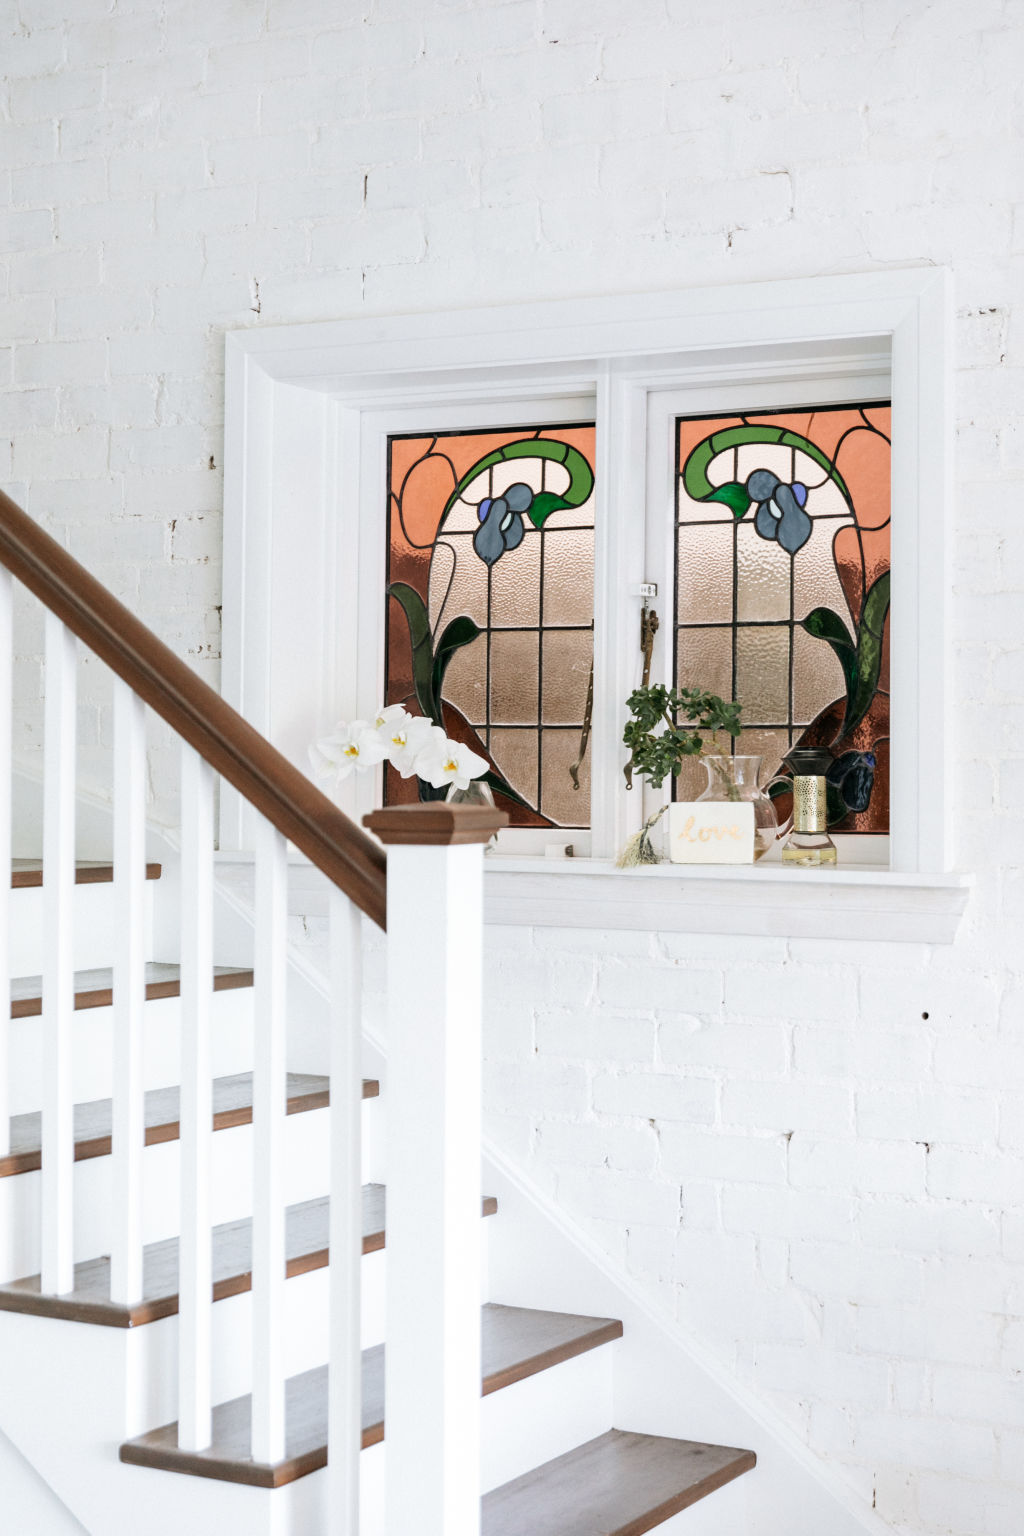 The merging of two eras is sweetly captured with an original leadlight window you find at the bottom of the stairwell. Photo: Caroline McCredie